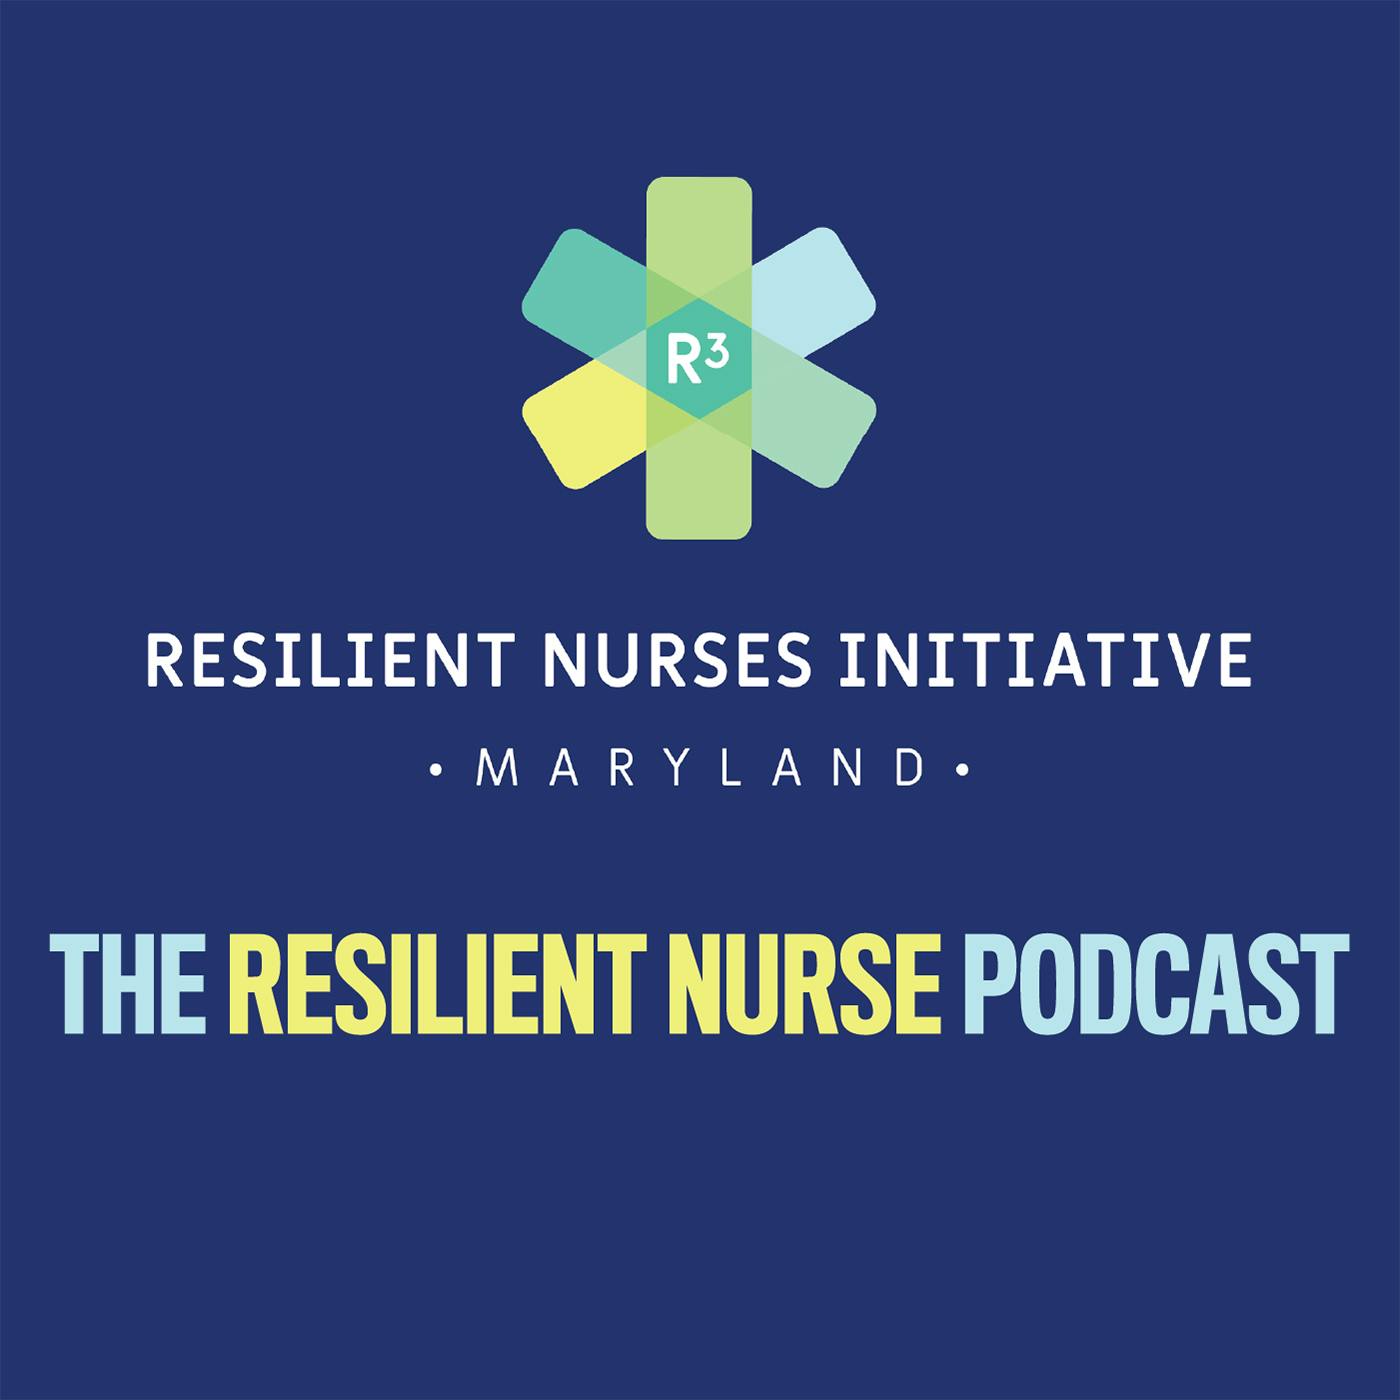 The Resilient Nurse, Episode 2: “What’s On Your Plate” – A Time Management Tool for Students and Nurses